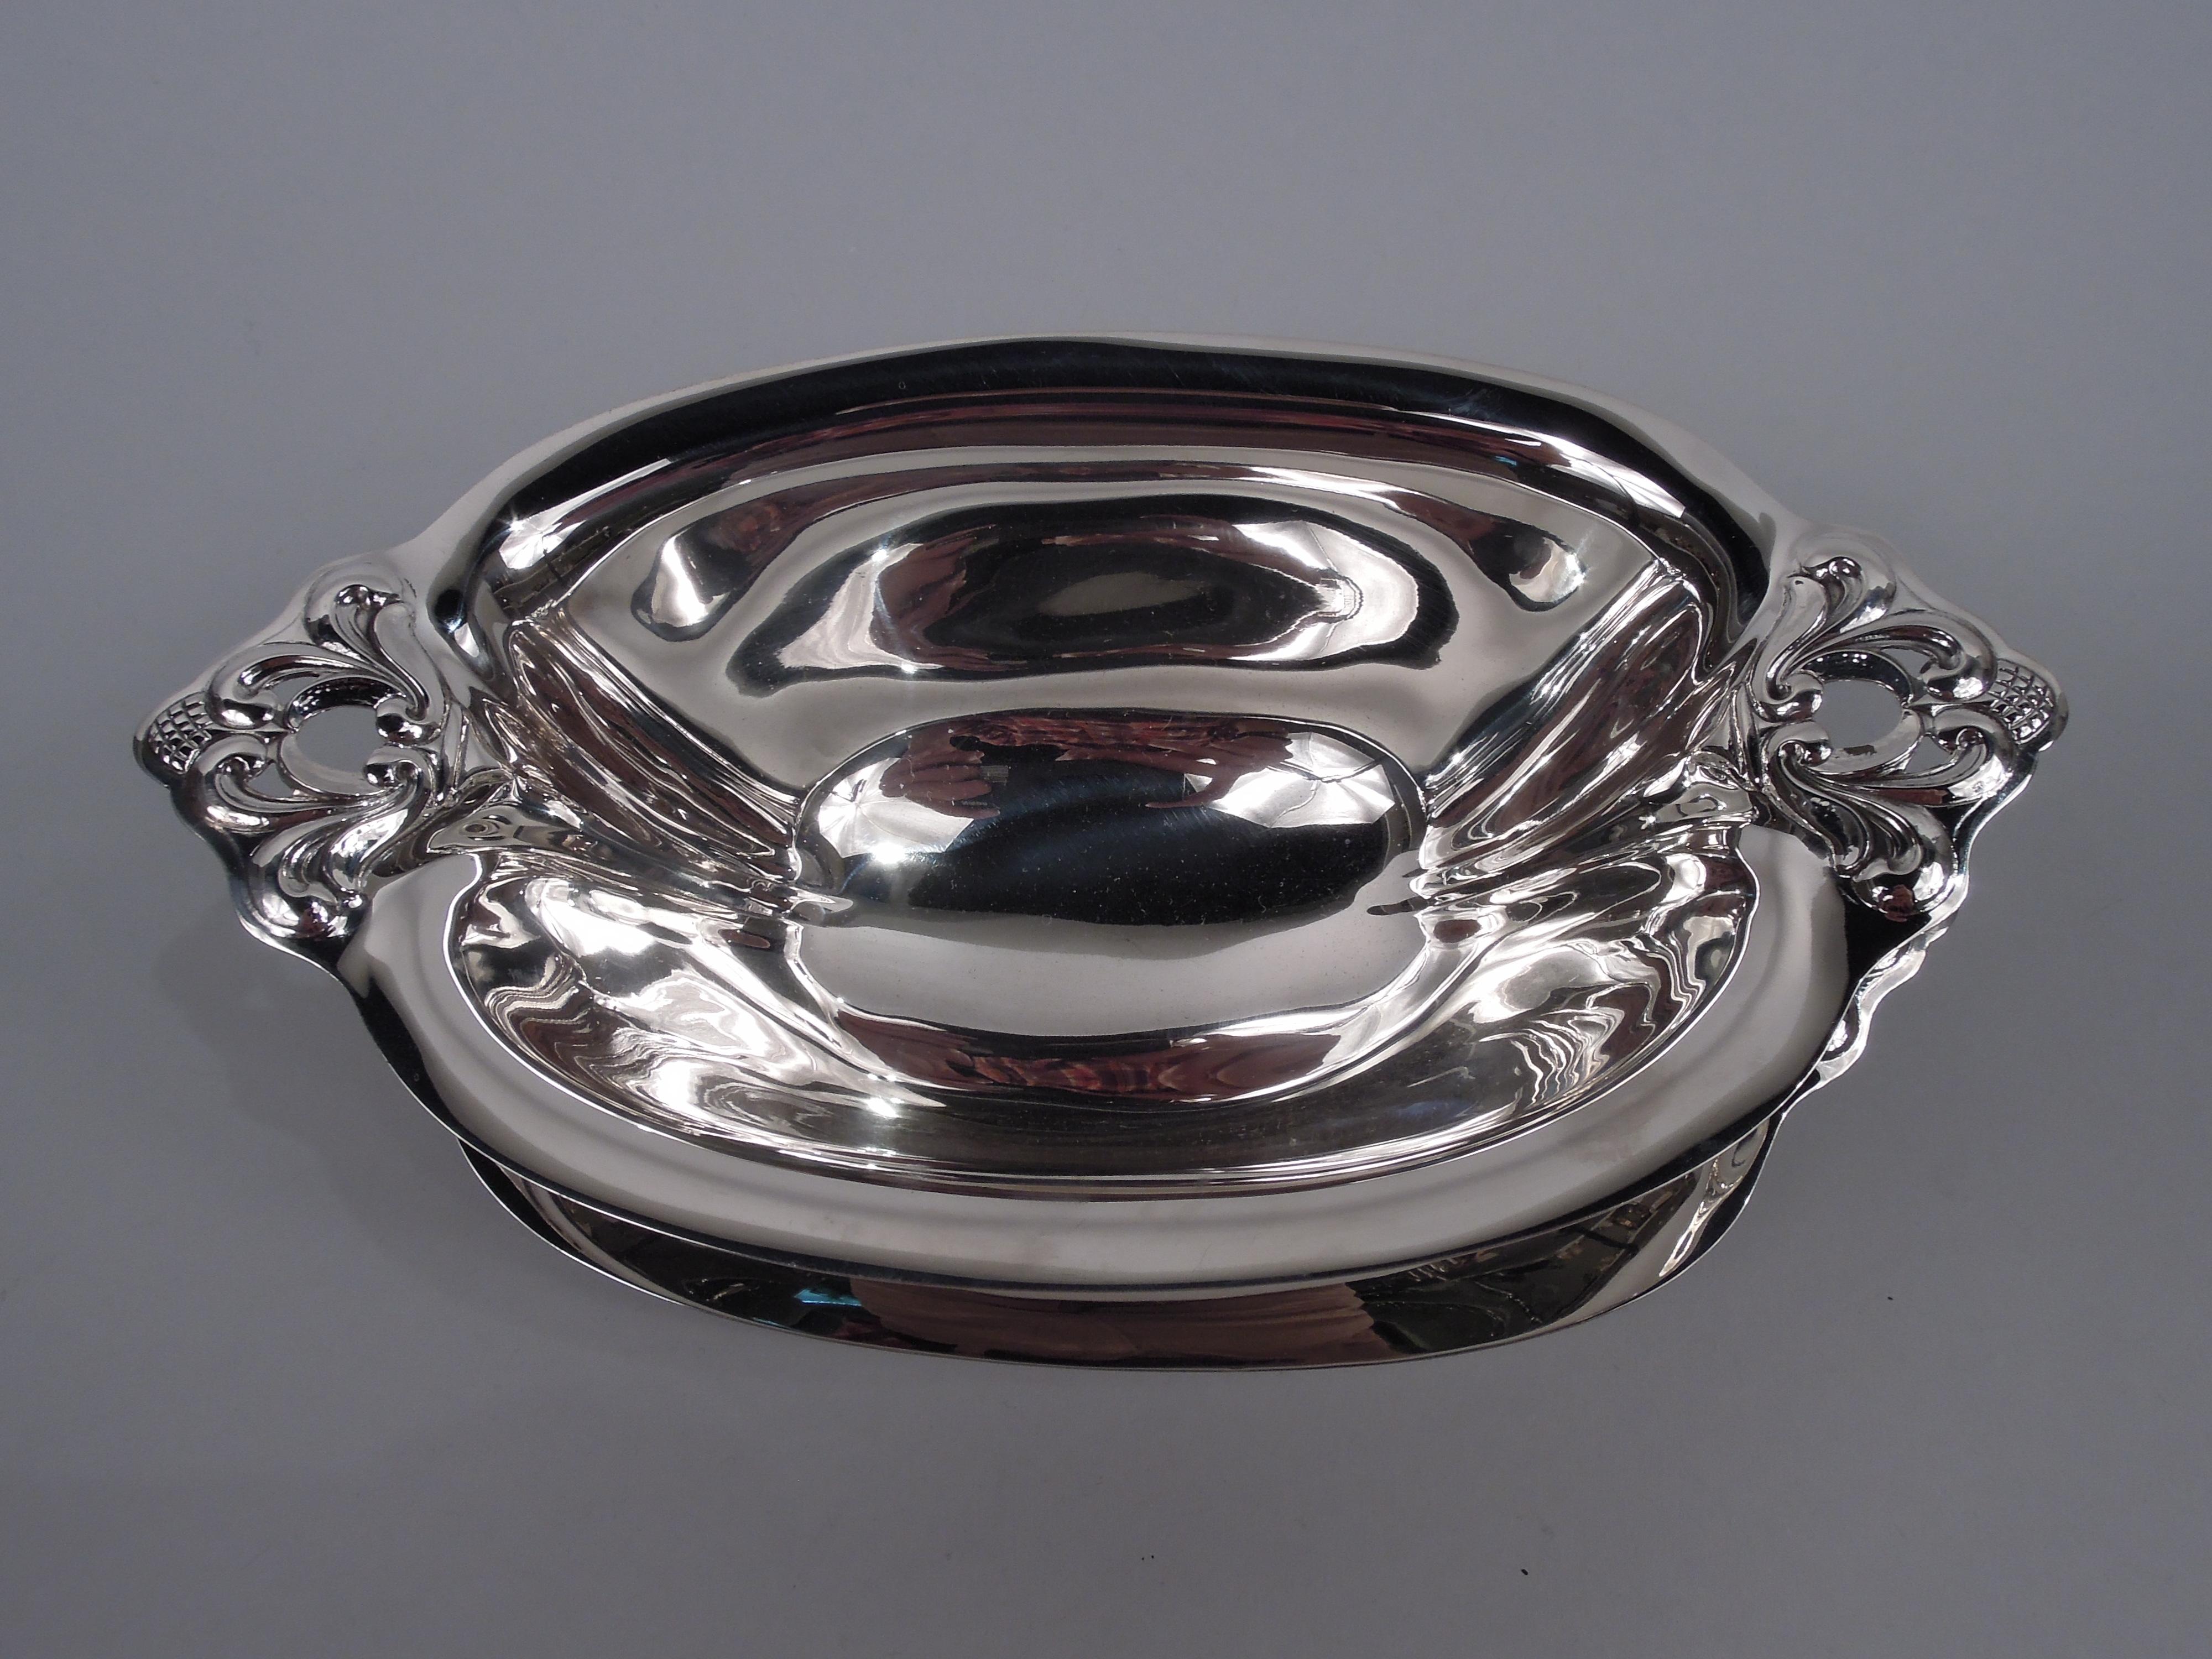 Royal Danish sterling silver sauce bowl on stand. Made by International in Meriden, Conn. Ovoid bowl with tapering sides and short inset foot. Stand has oval well and wide and tapering sides. At ends are open and embossed acorns and scrolls. Fully